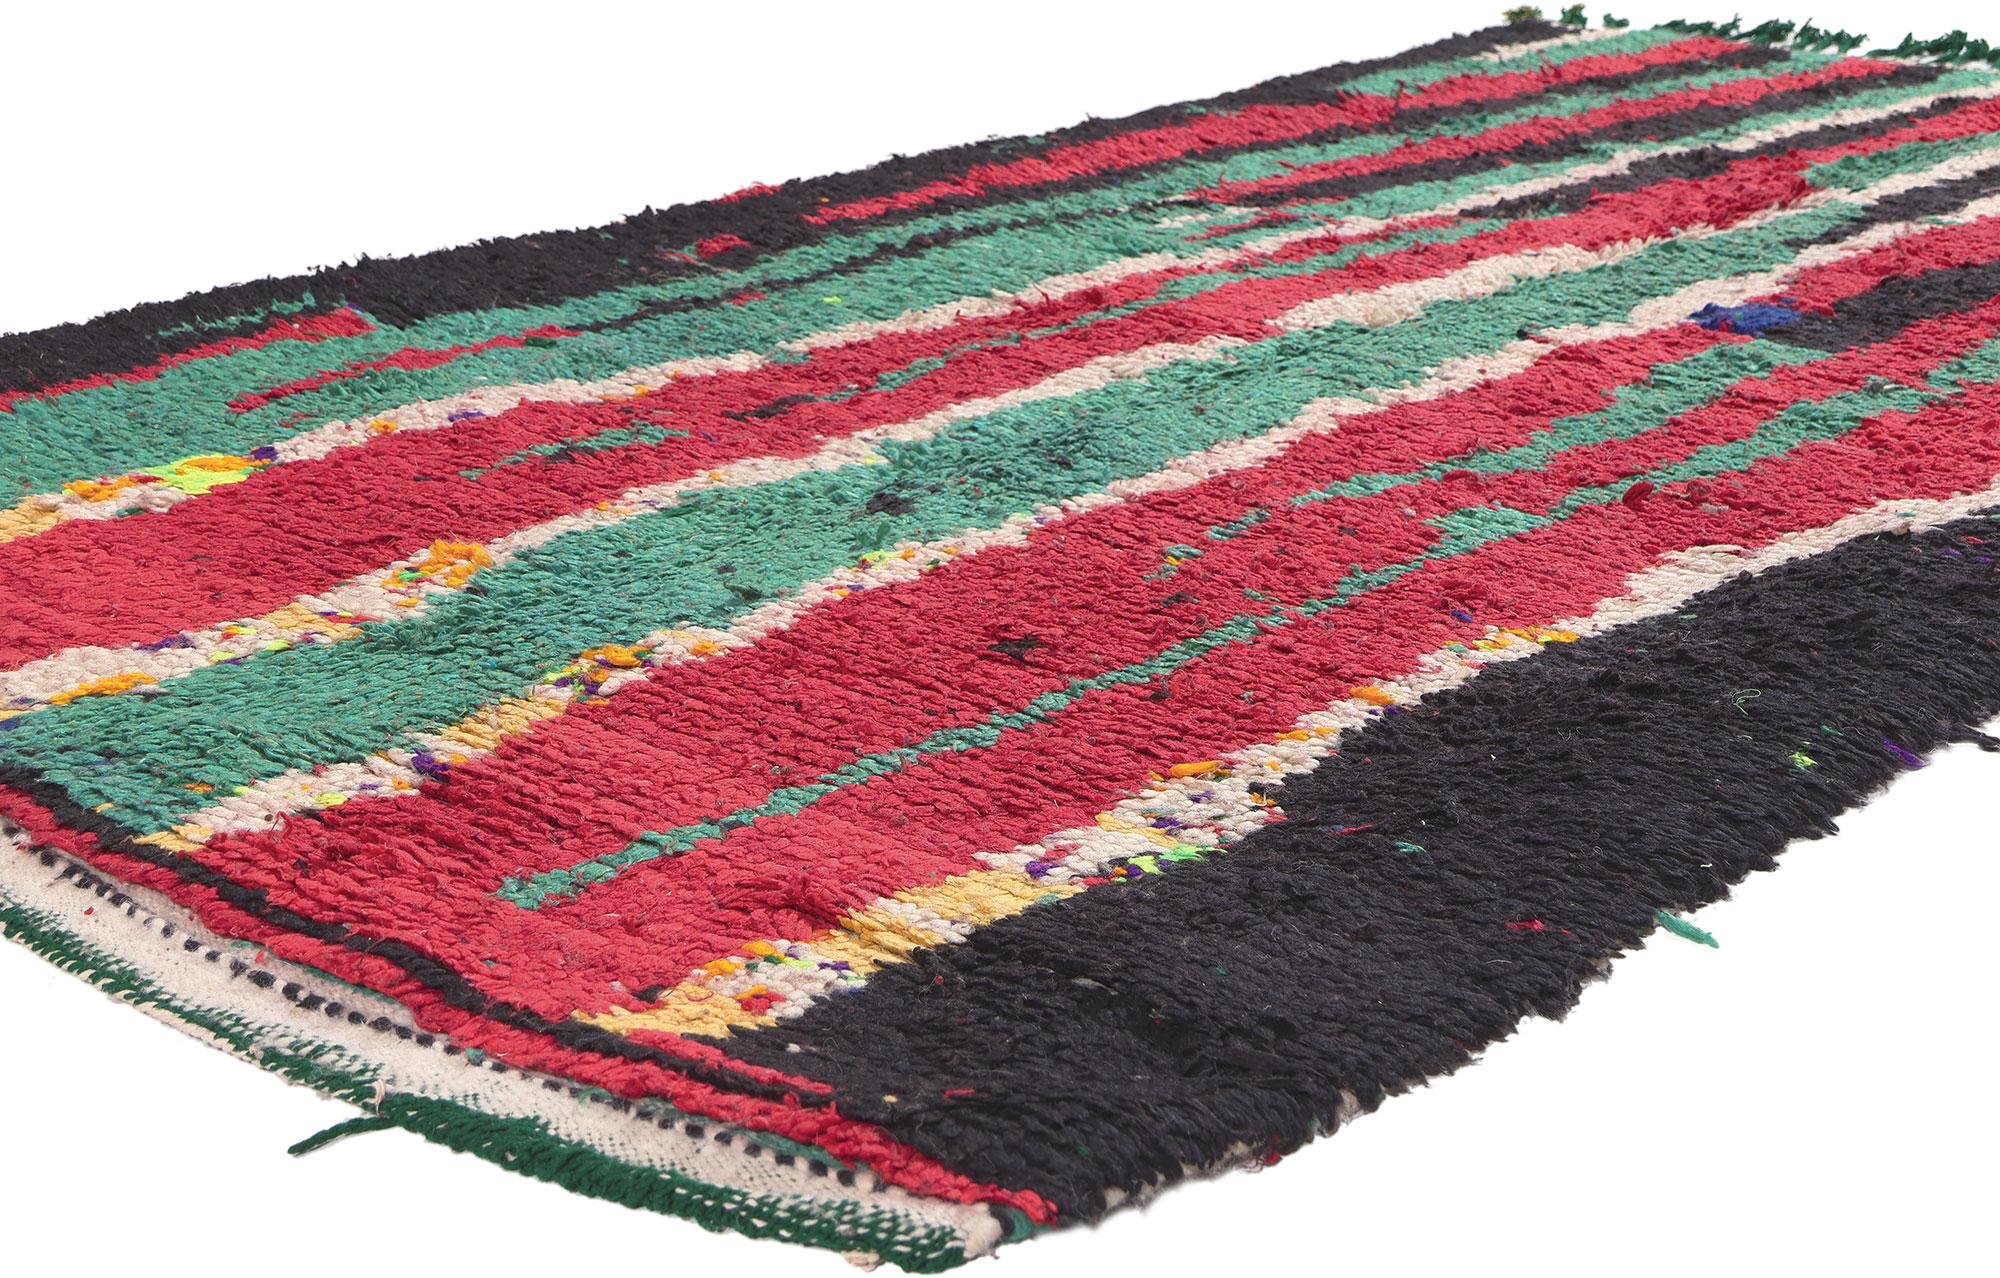 20065 Vintage Boujad Moroccan Rug, 04'02 X 07'06. Immerse yourself in the avant-garde allure of this hand-knotted wool Boujad Moroccan rug, a masterpiece of abstract expressionist style. Displaying a fearless, expressive design and lavish textures,